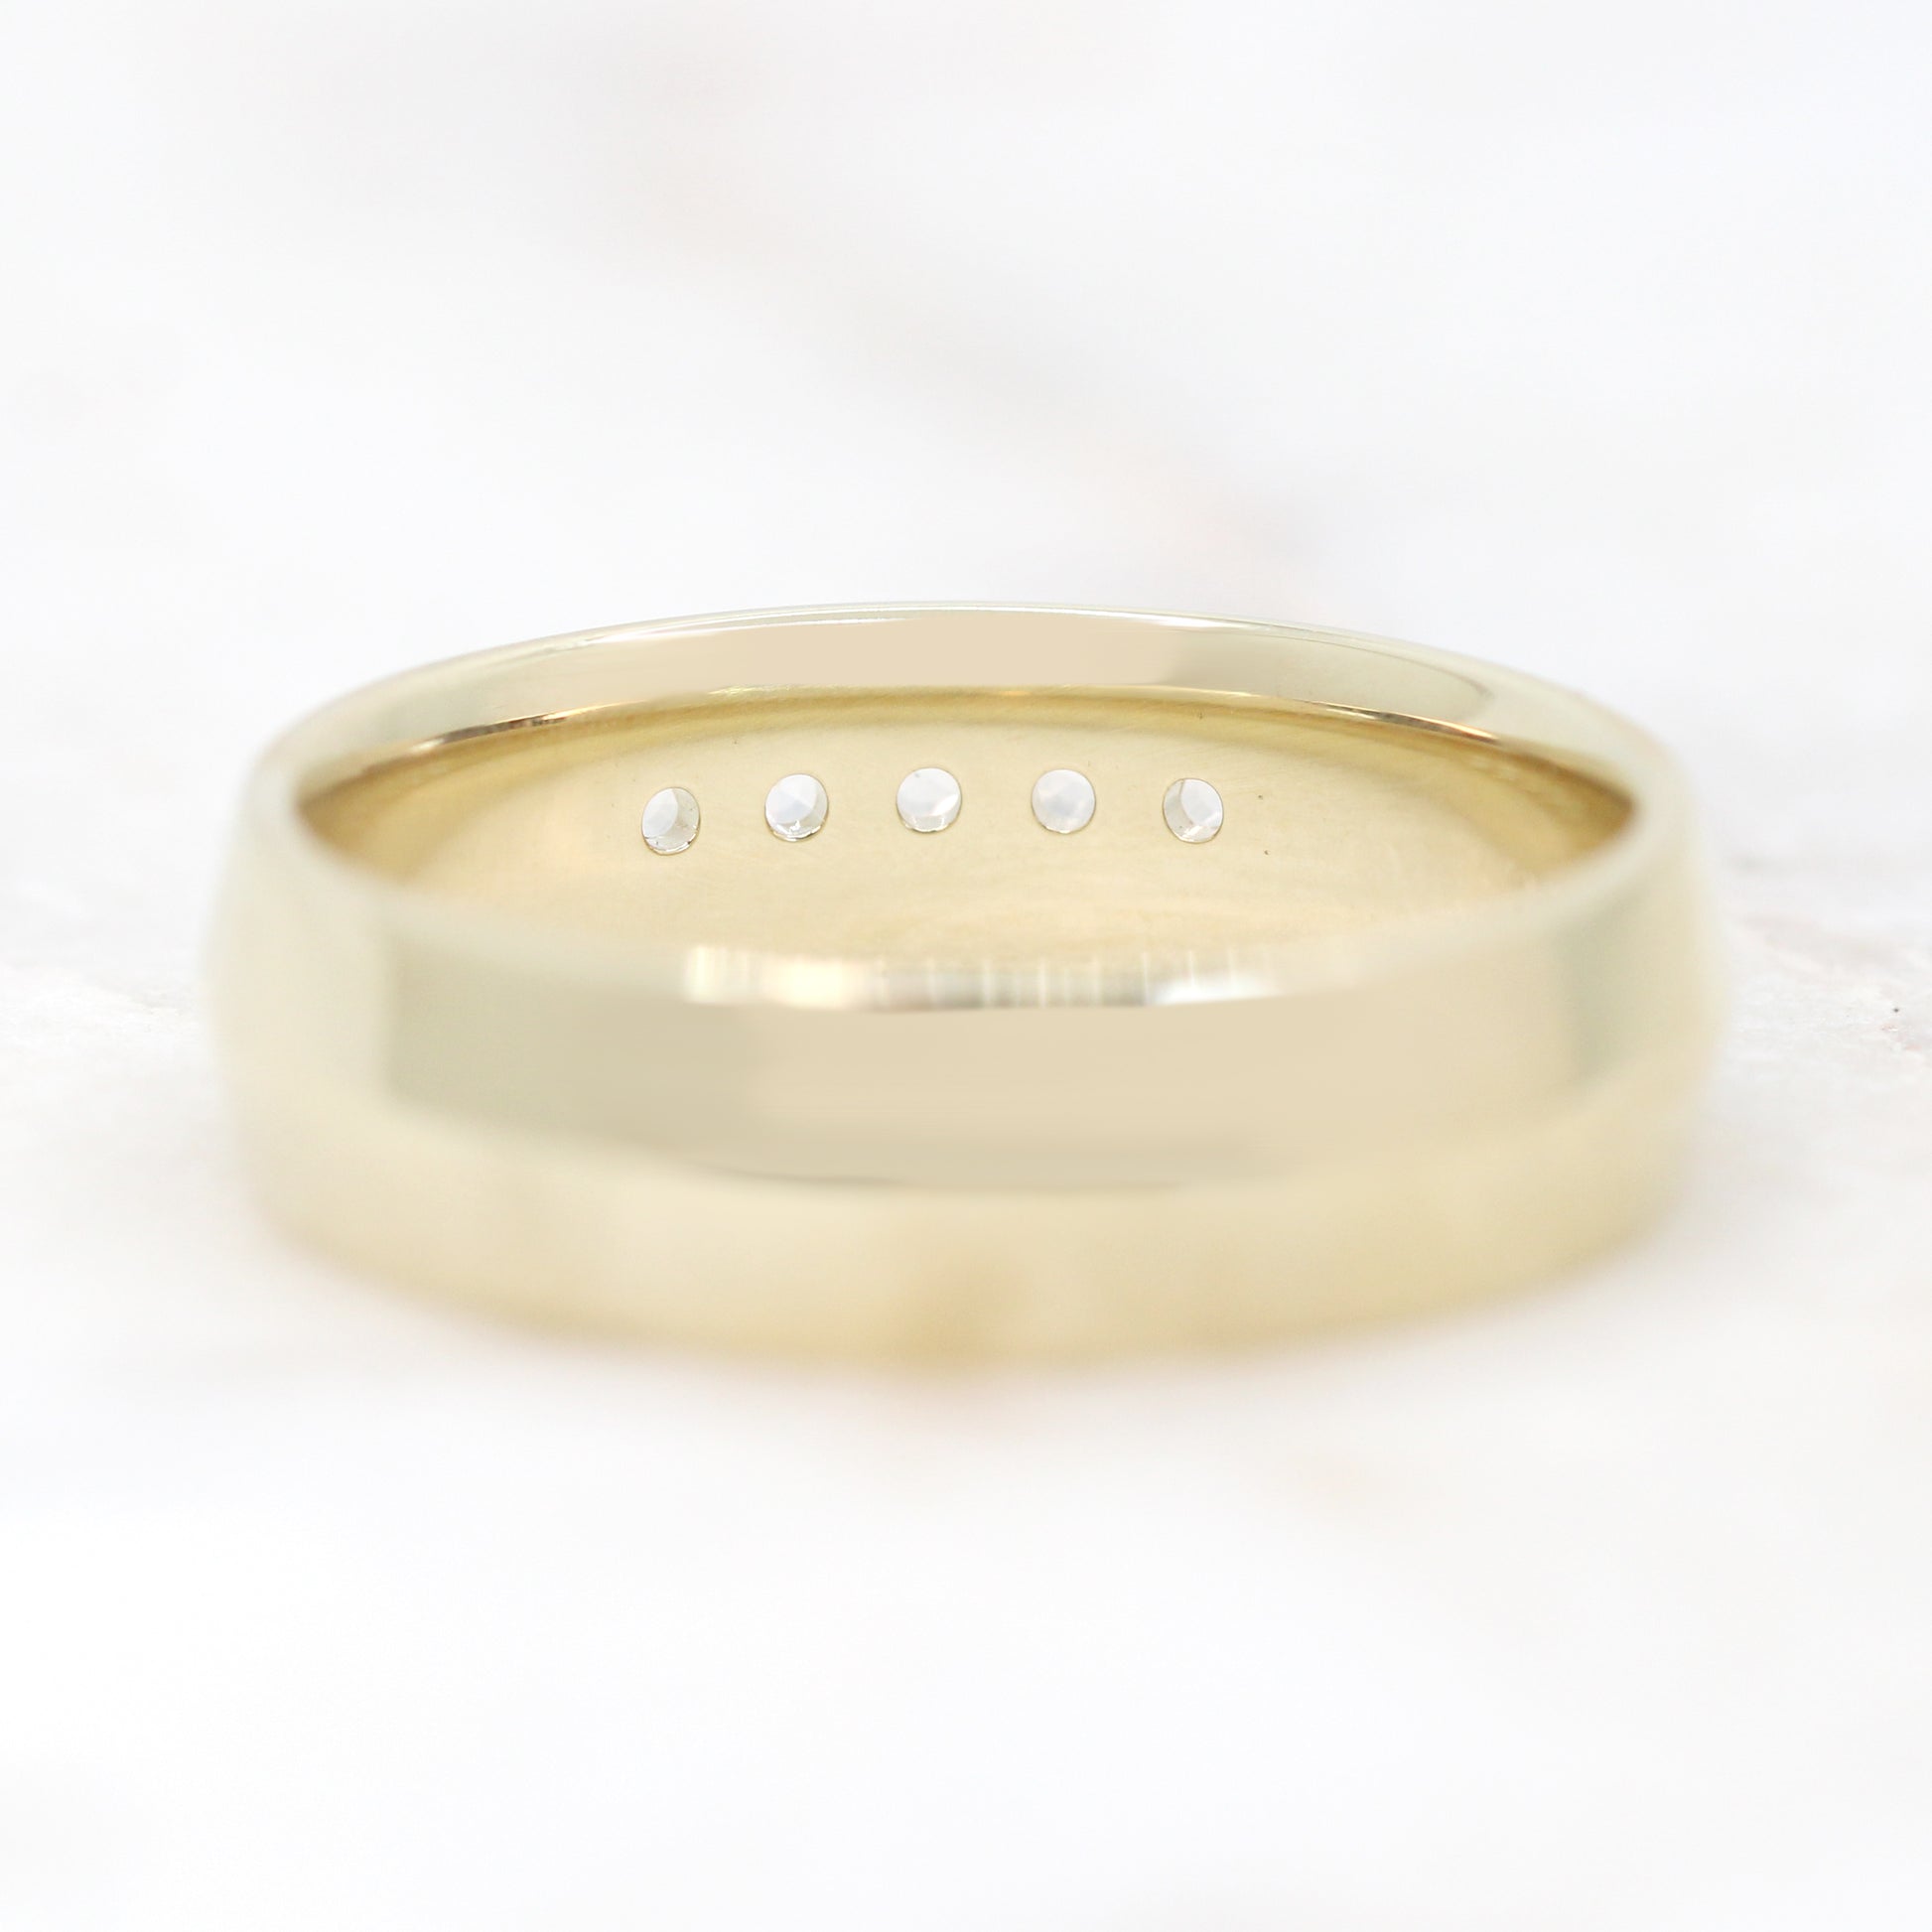 Samantha - (M) Joel Band *used price written in notes on bag* - Unisex Wedding Band - Made to Order, Choose Your Gold Tone - Midwinter Co. Alternative Bridal Rings and Modern Fine Jewelry